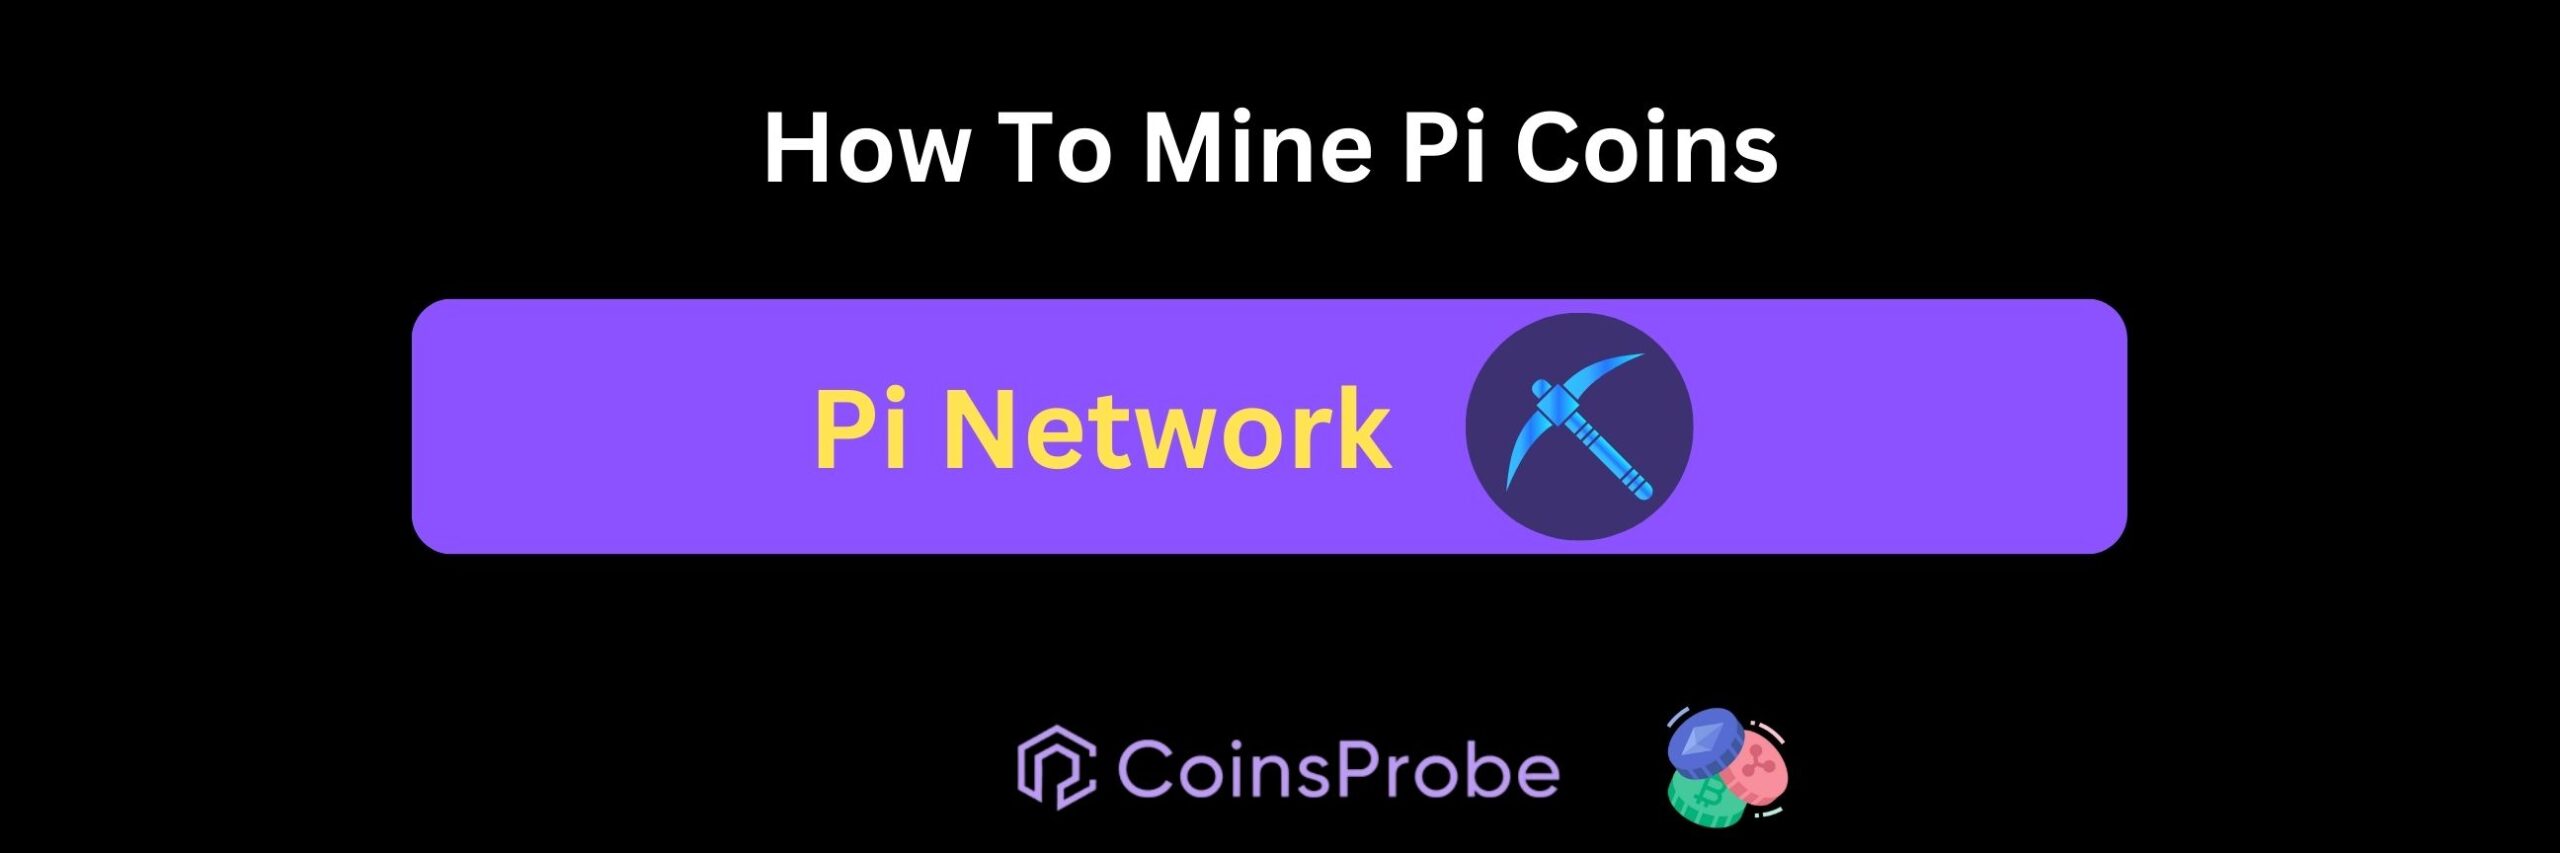 How To Mine Pi Coins